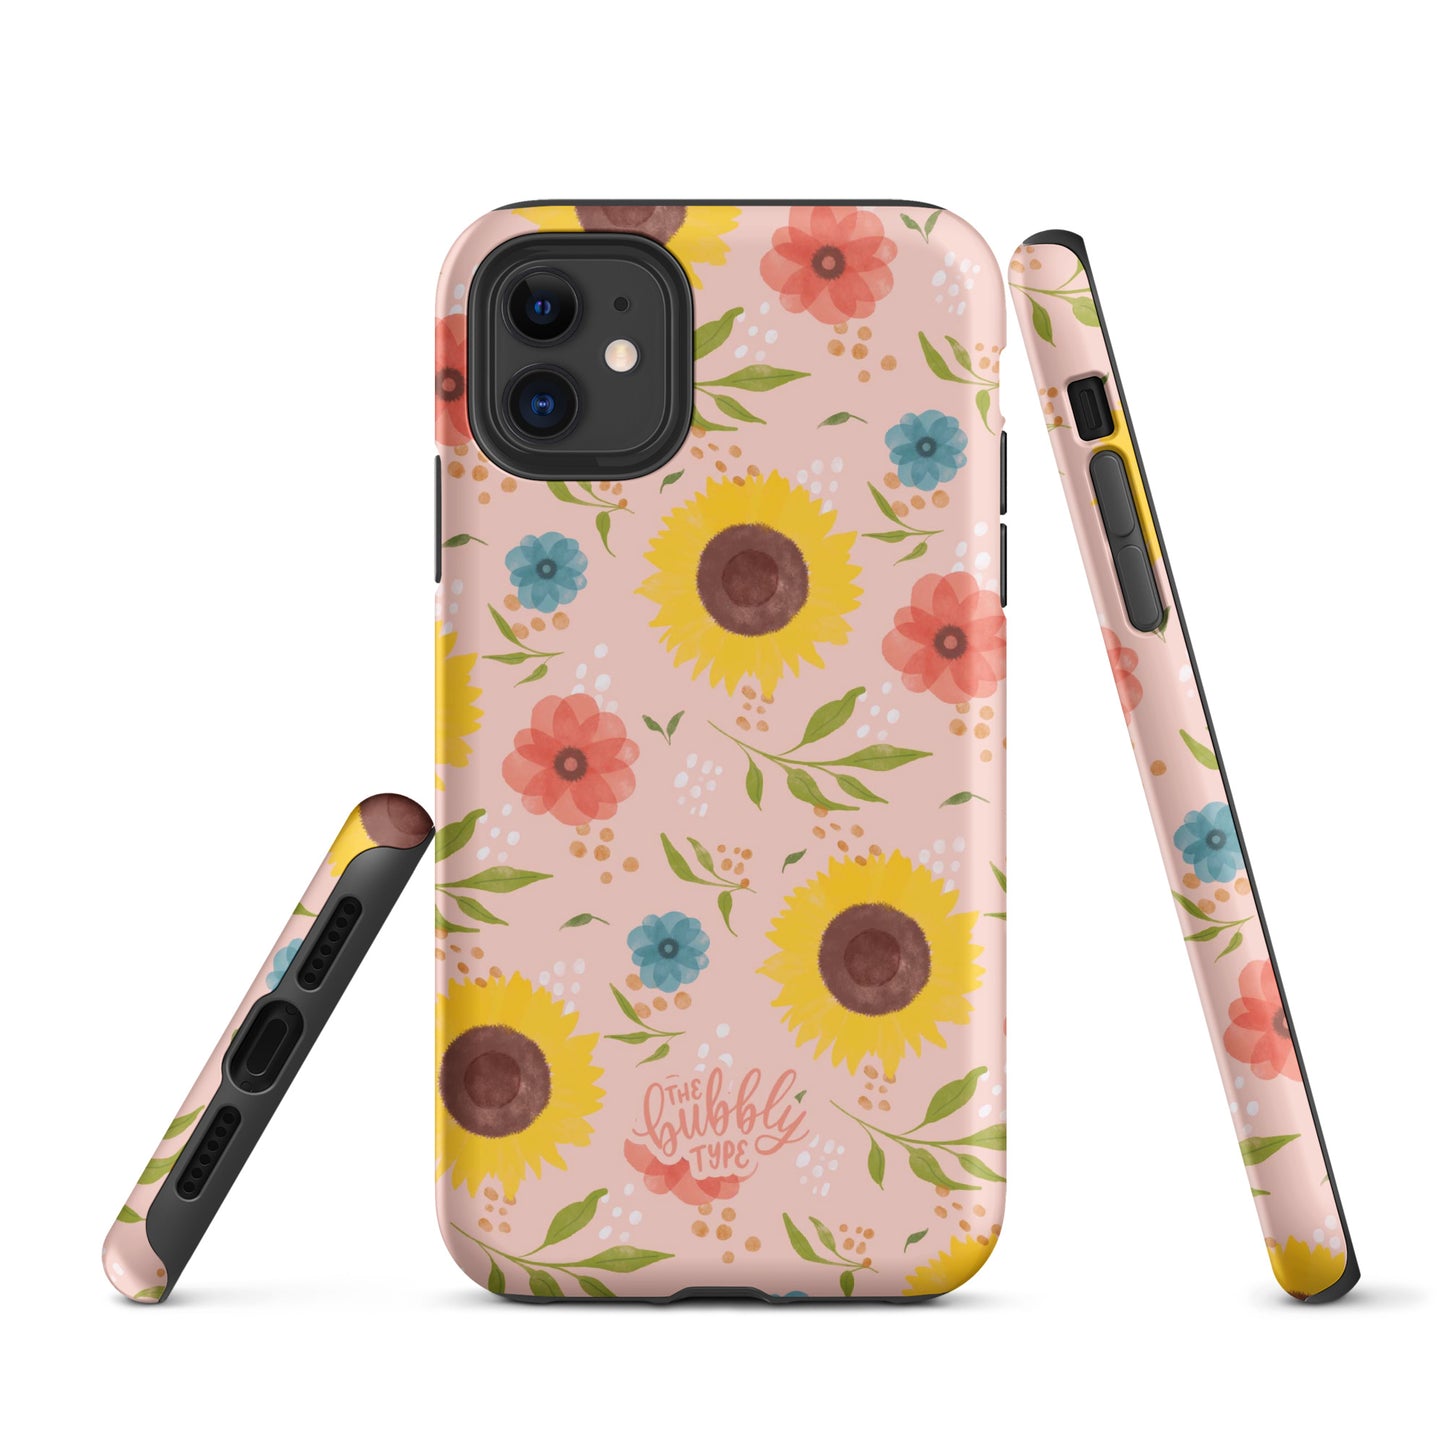 Sunflowers (Pink) Tough iPhone case